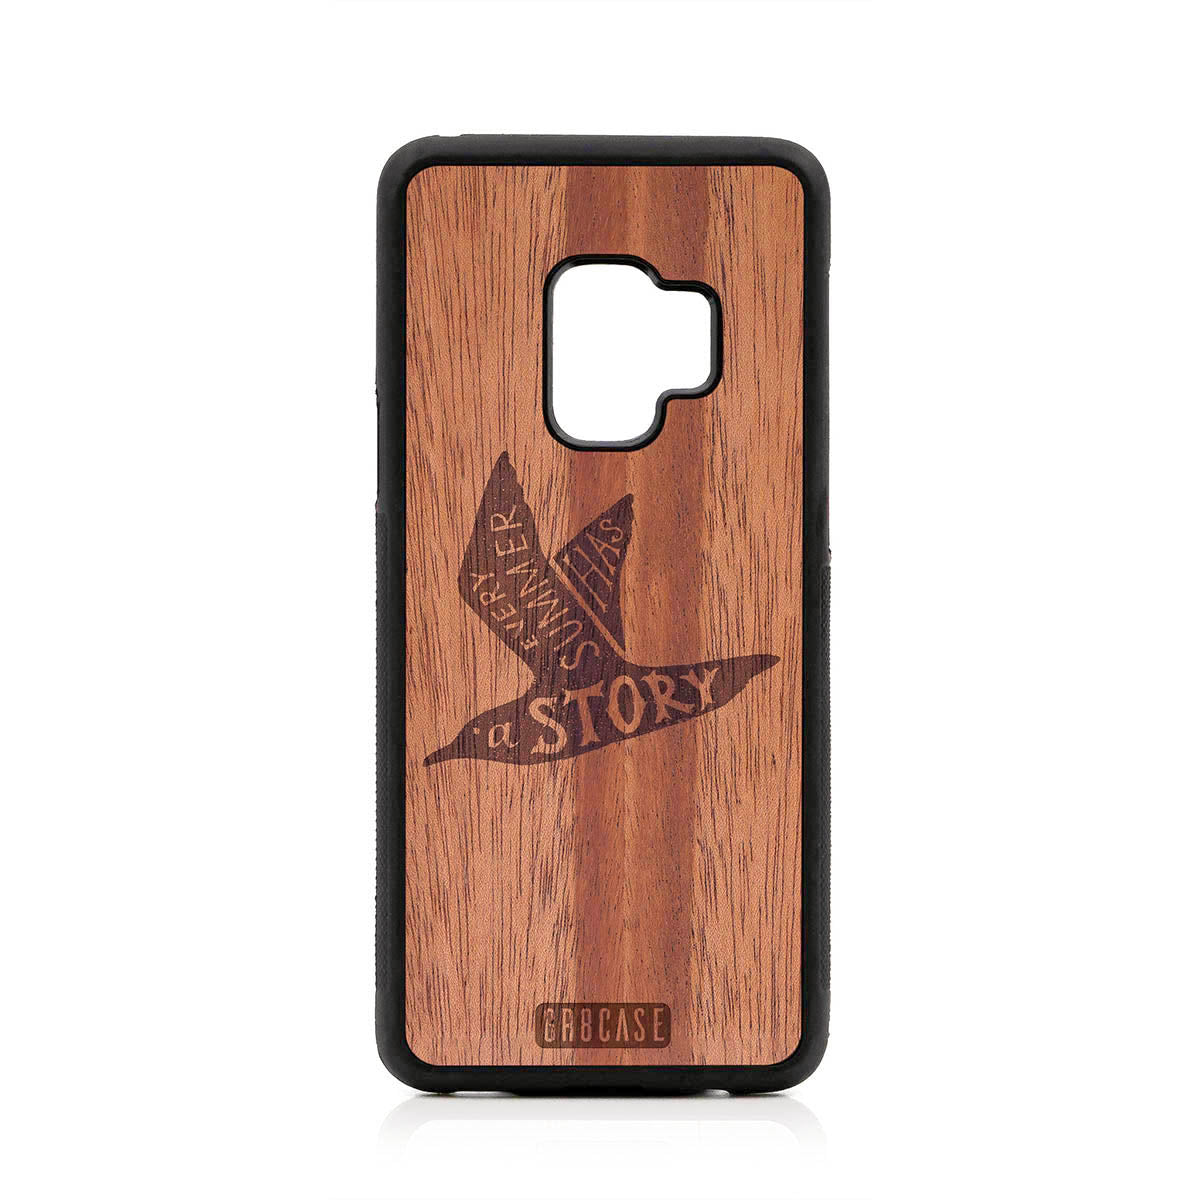 Every Summer Has A Story (Seagull) Design Wood Case For Samsung Galaxy S9